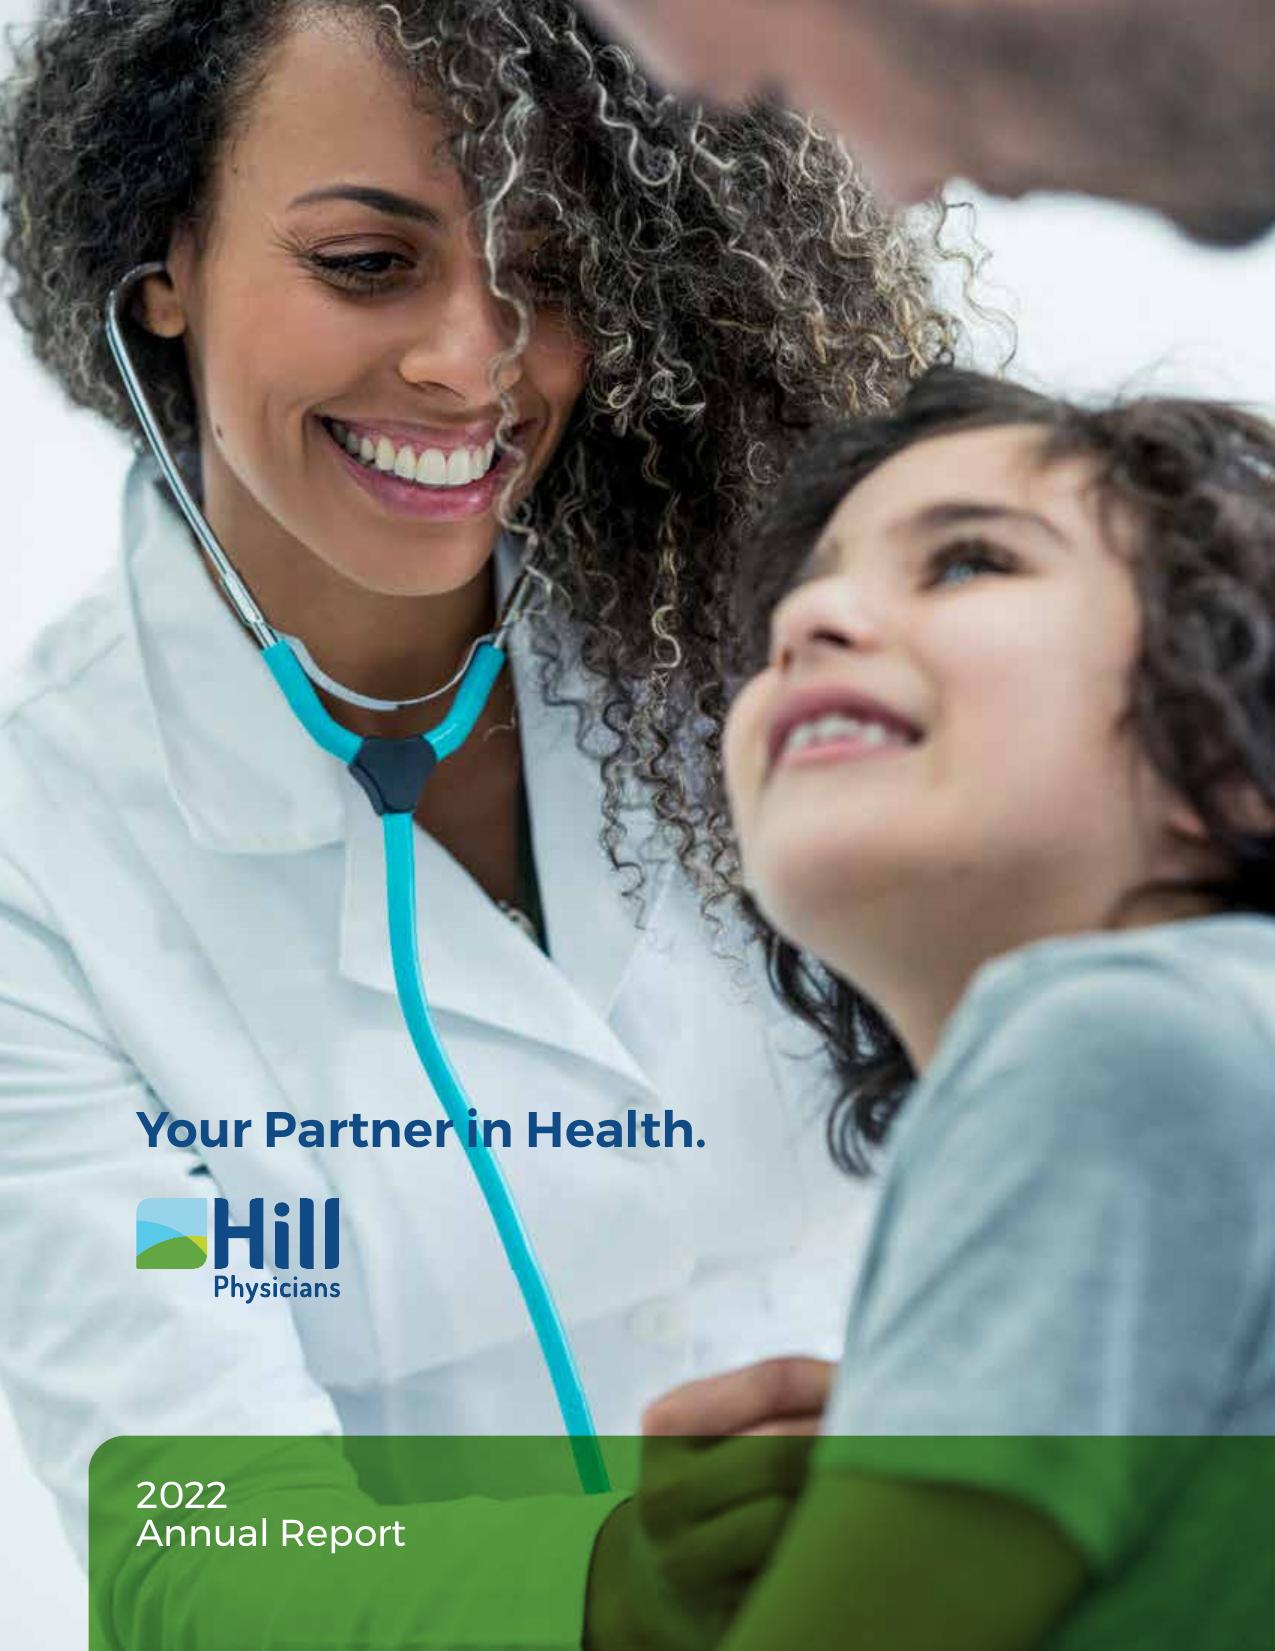 HILLPHYSICIANS 2023 Annual Report